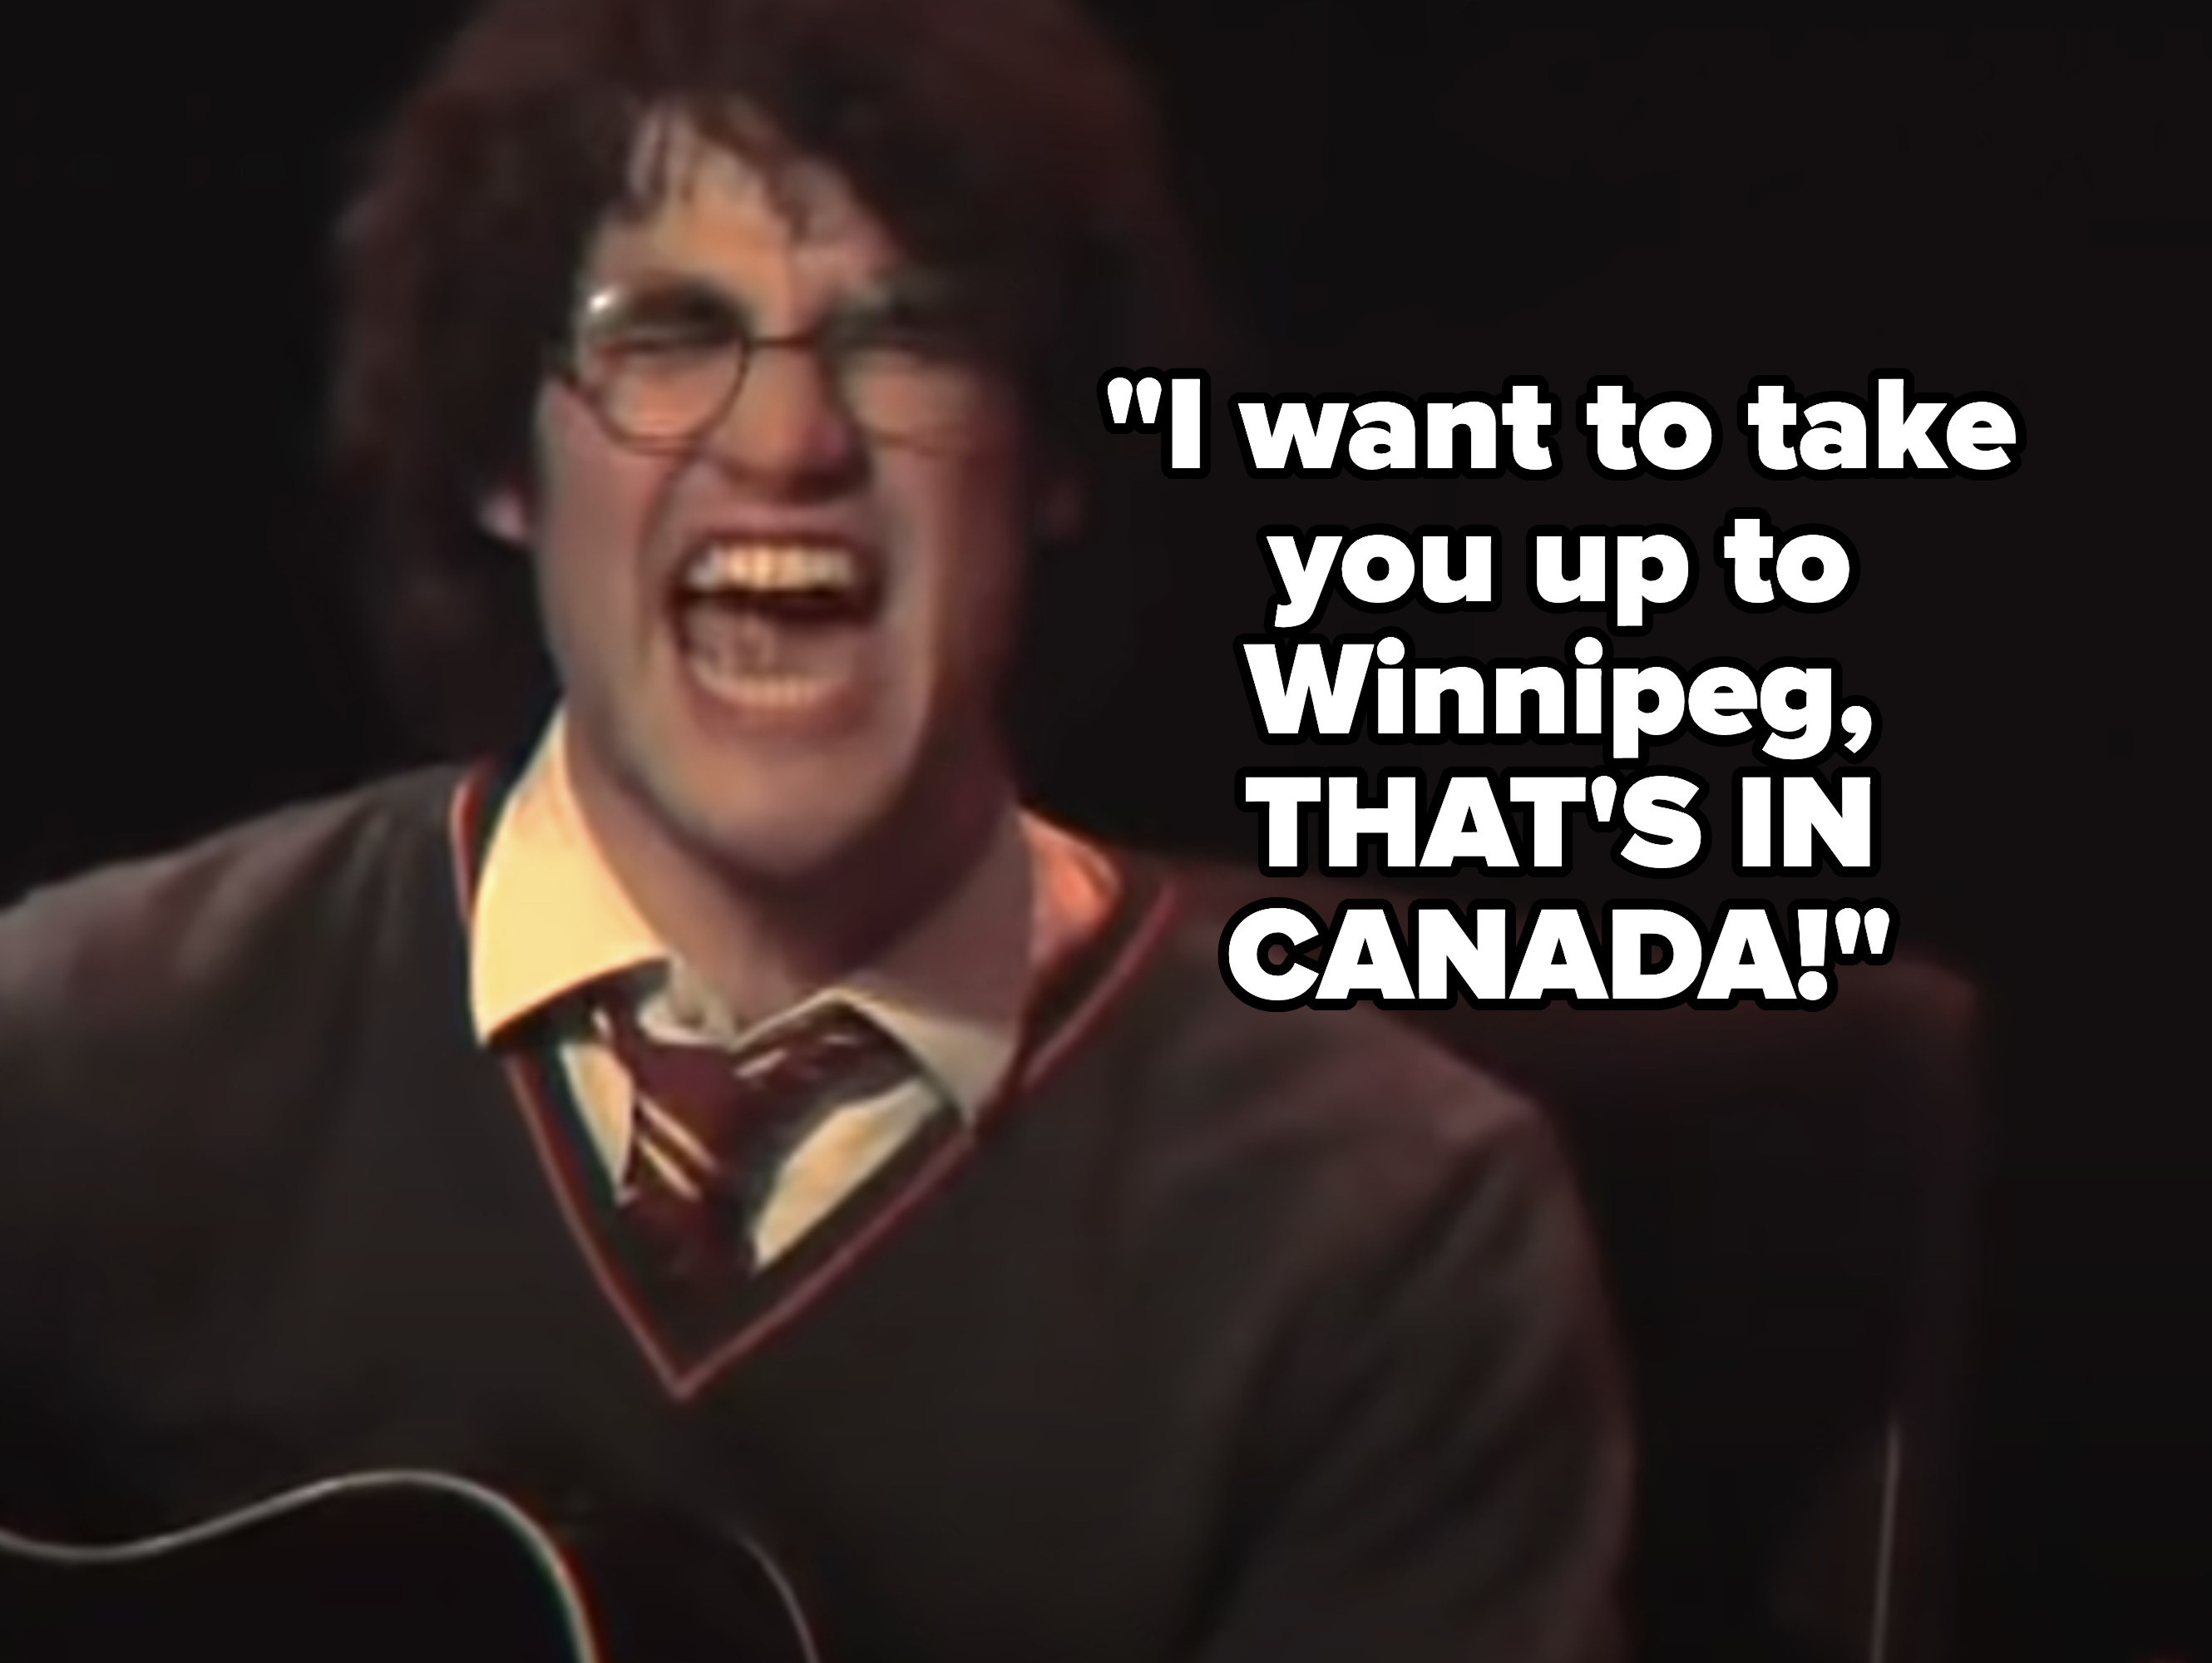 Harry: &quot;I want to take you up to Winnipeg, THAT&#x27;S IN CANADA!&quot;